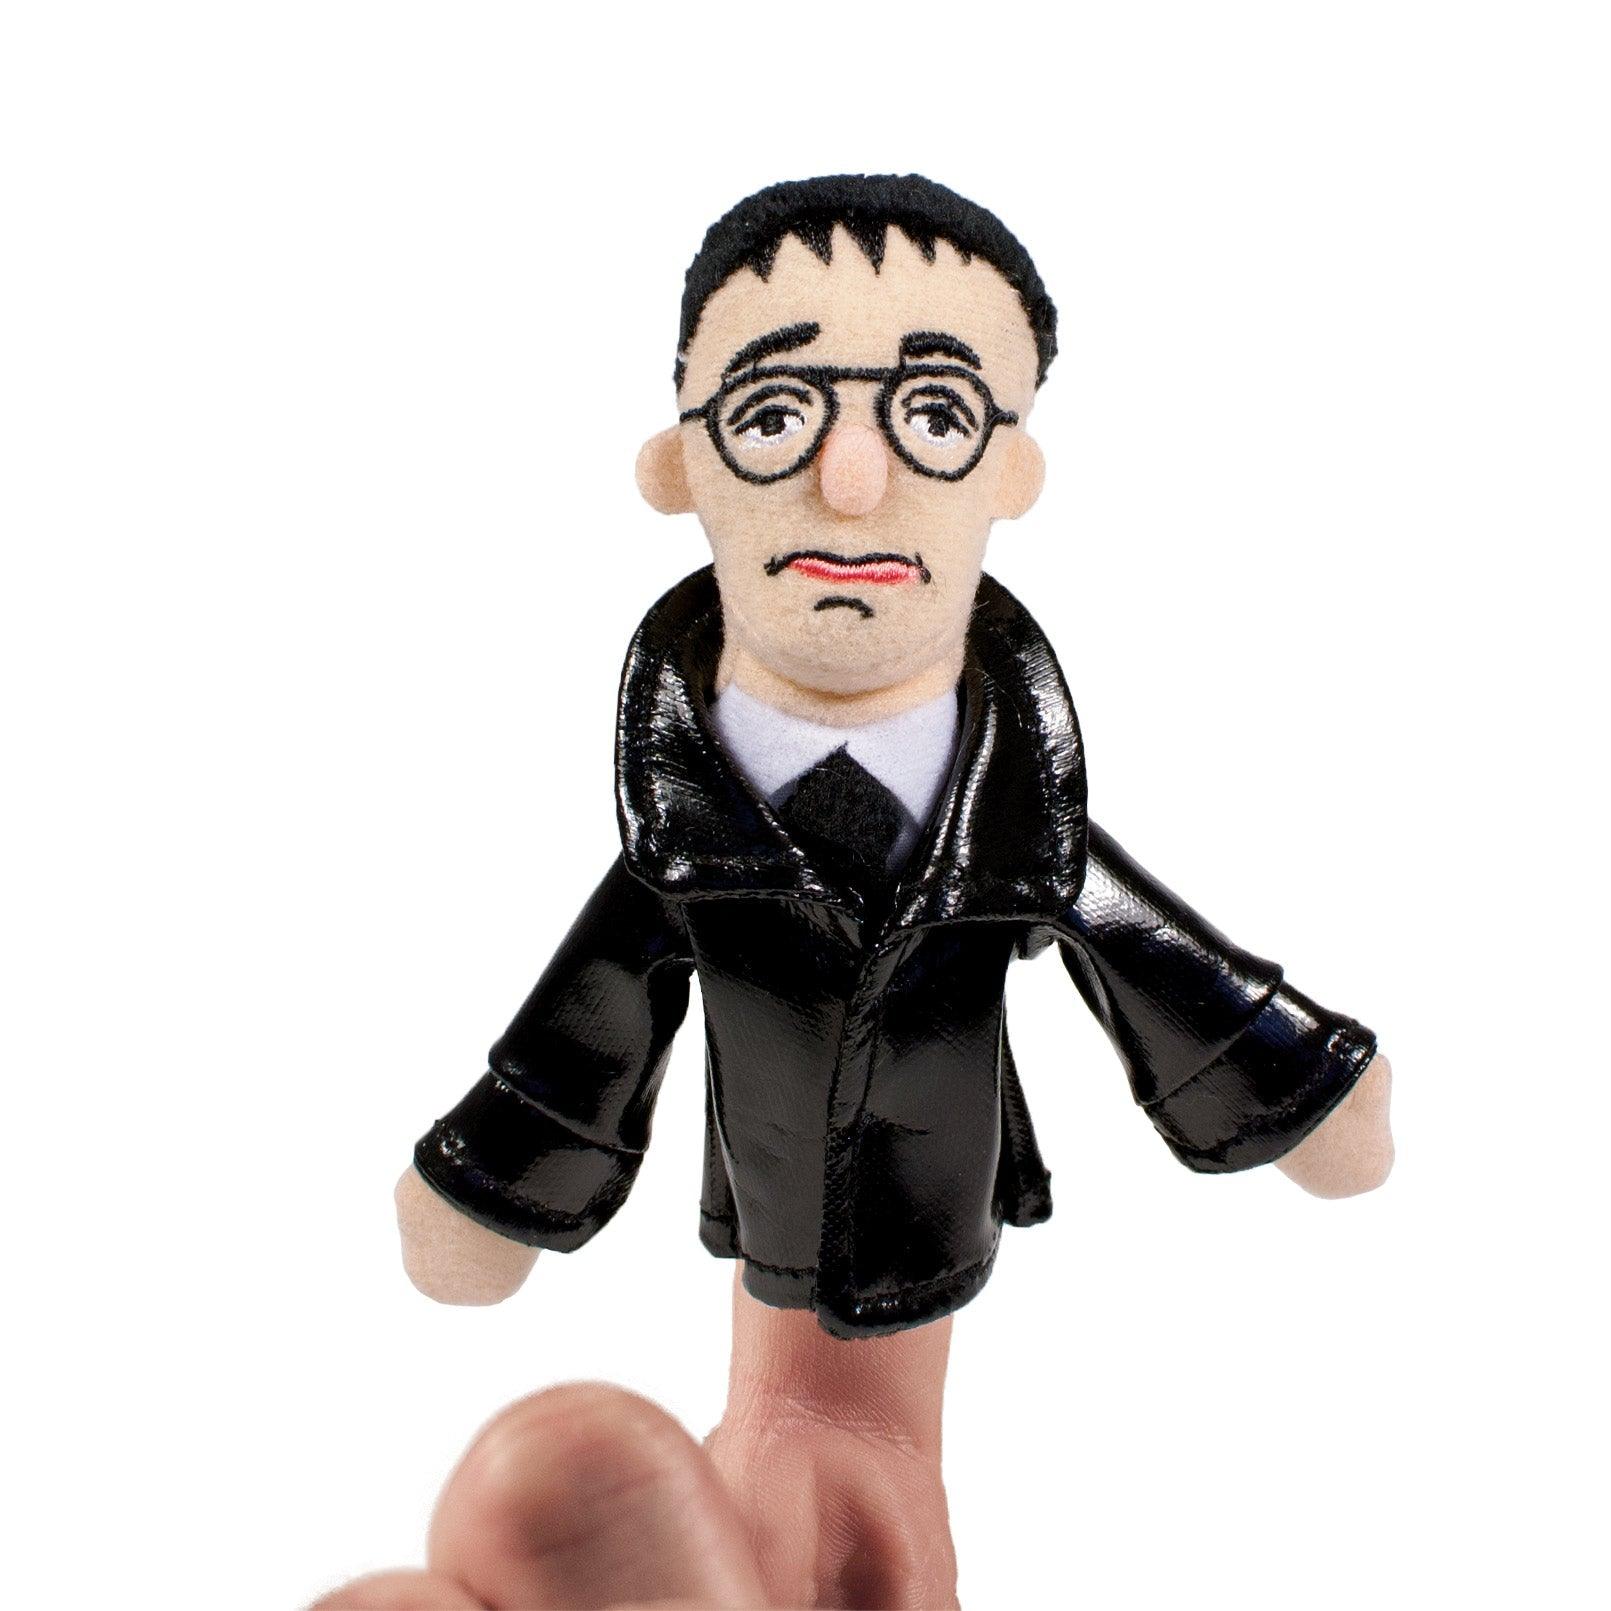 Product photo of Bertolt Brecht Finger Puppet, a novelty gift manufactured by The Unemployed Philosophers Guild.